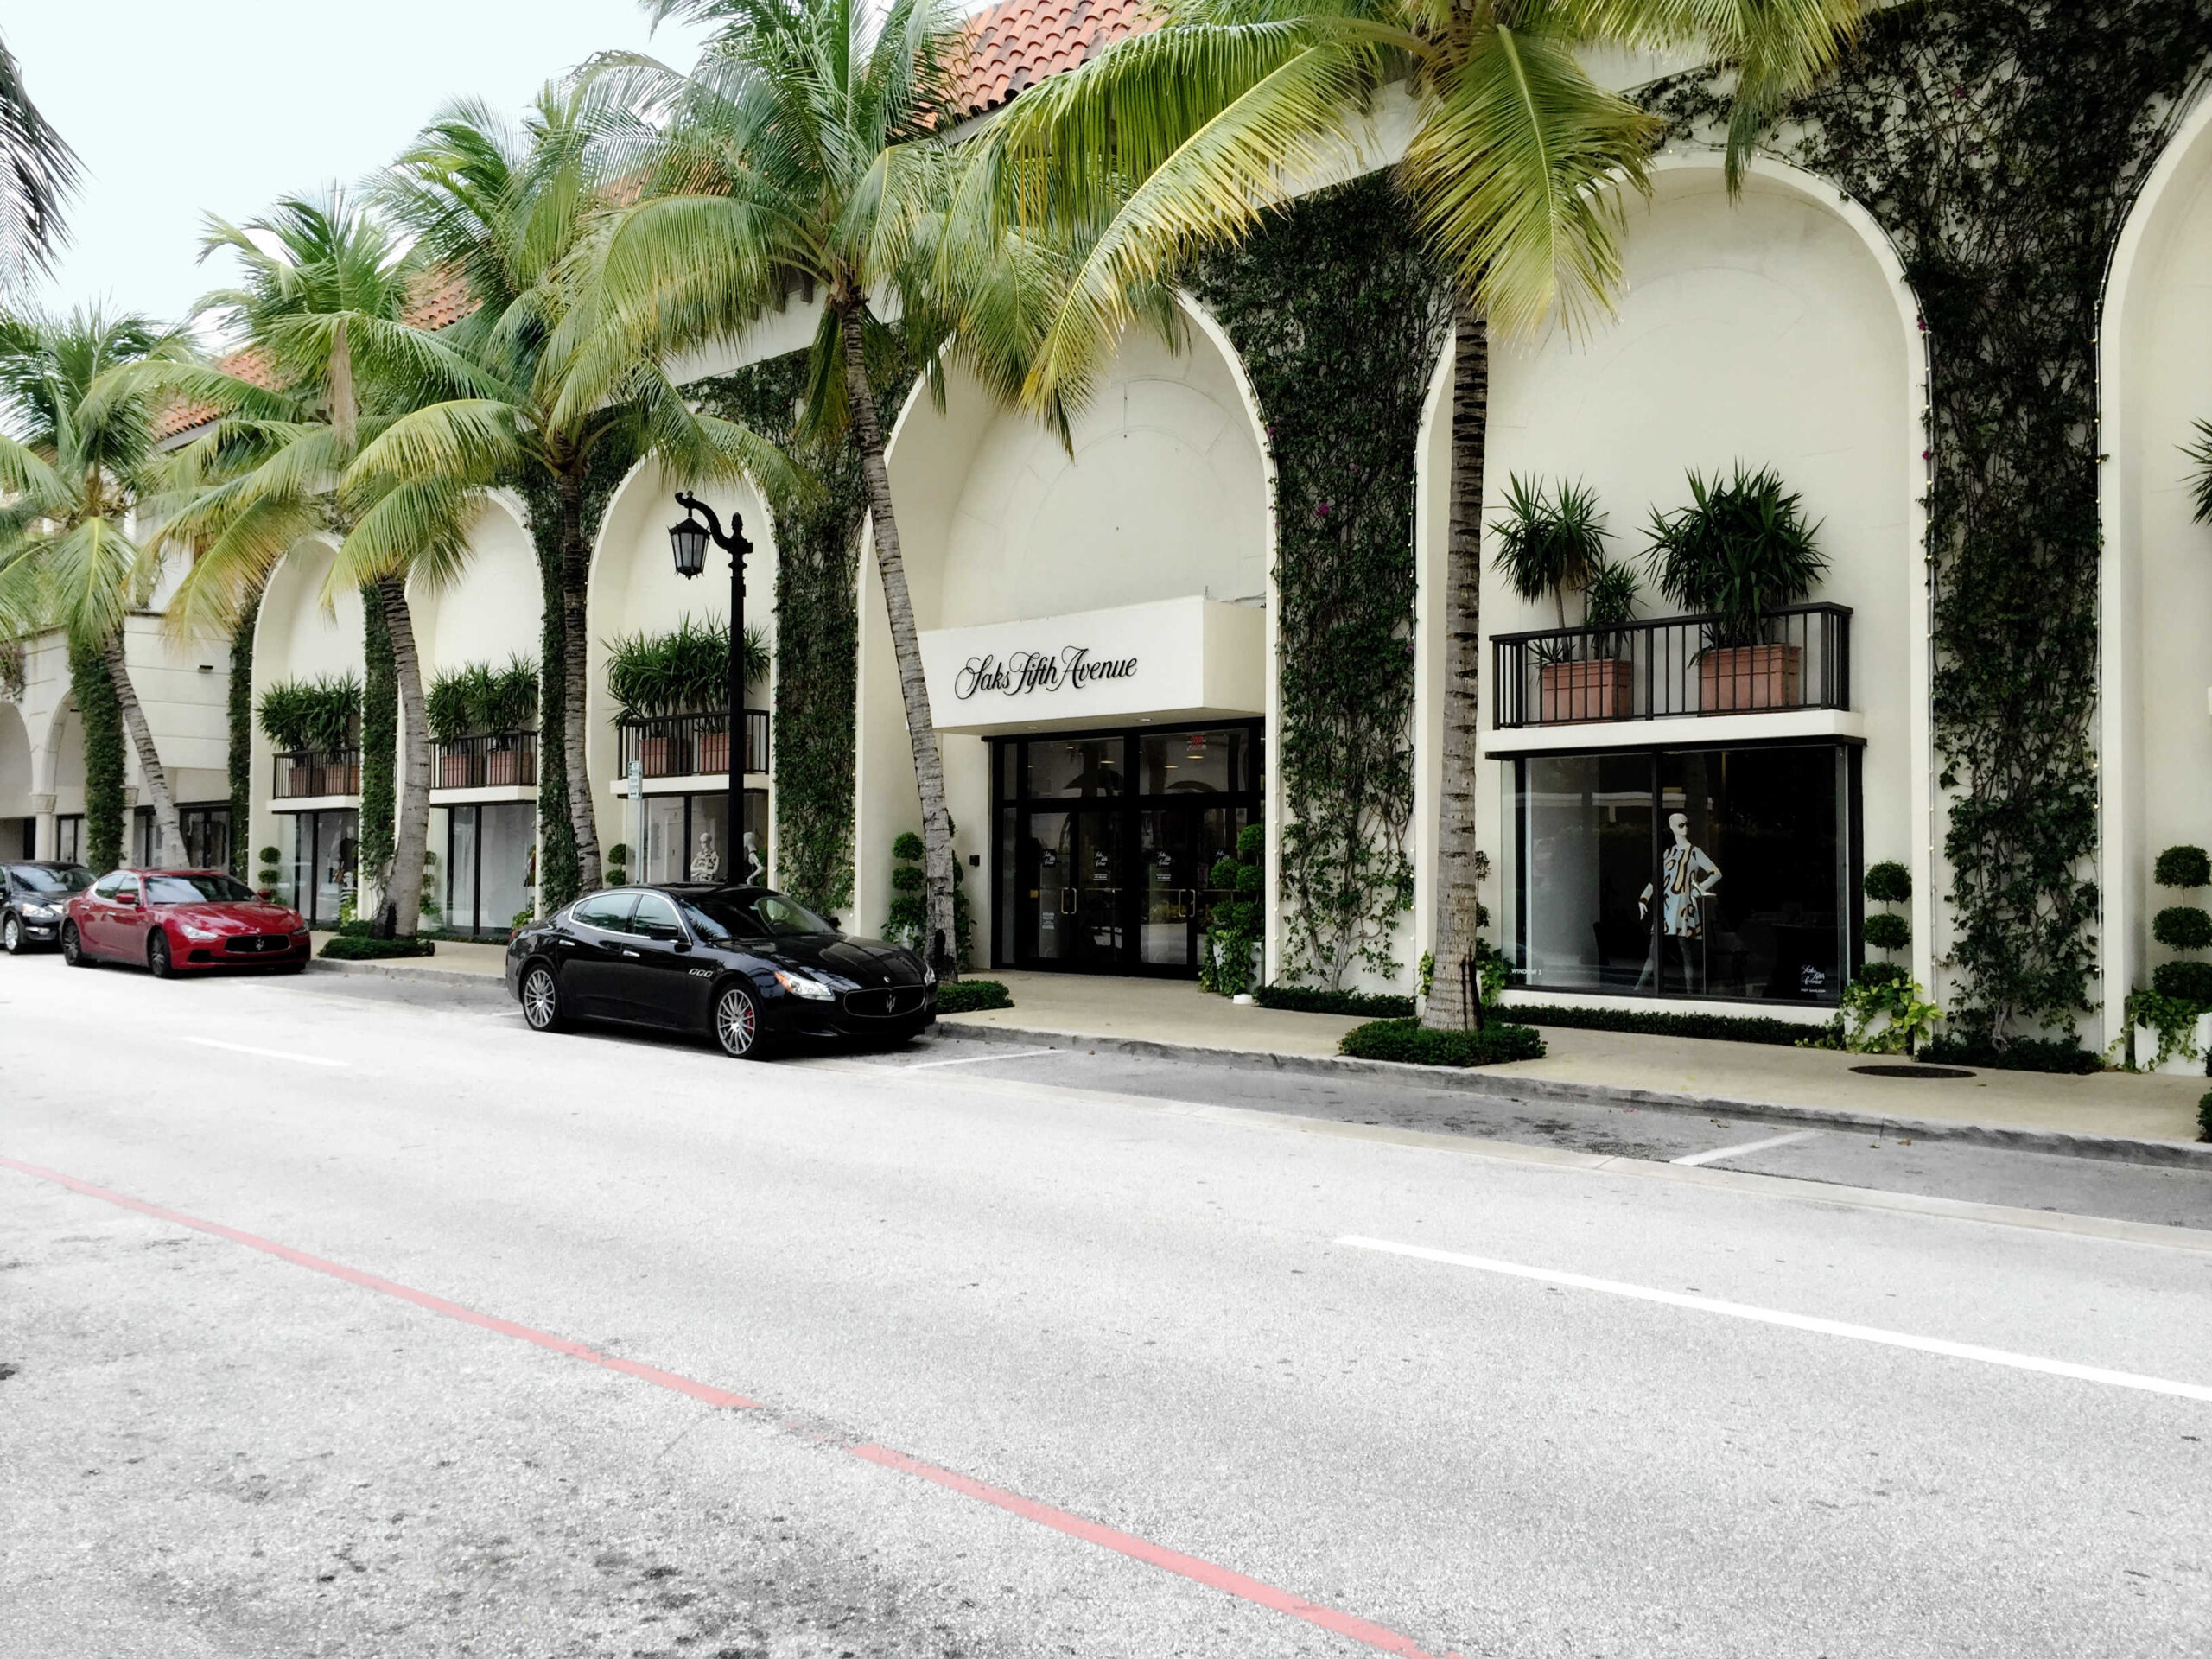 Neiman Marcus to leave Worth Avenue in Palm Beach